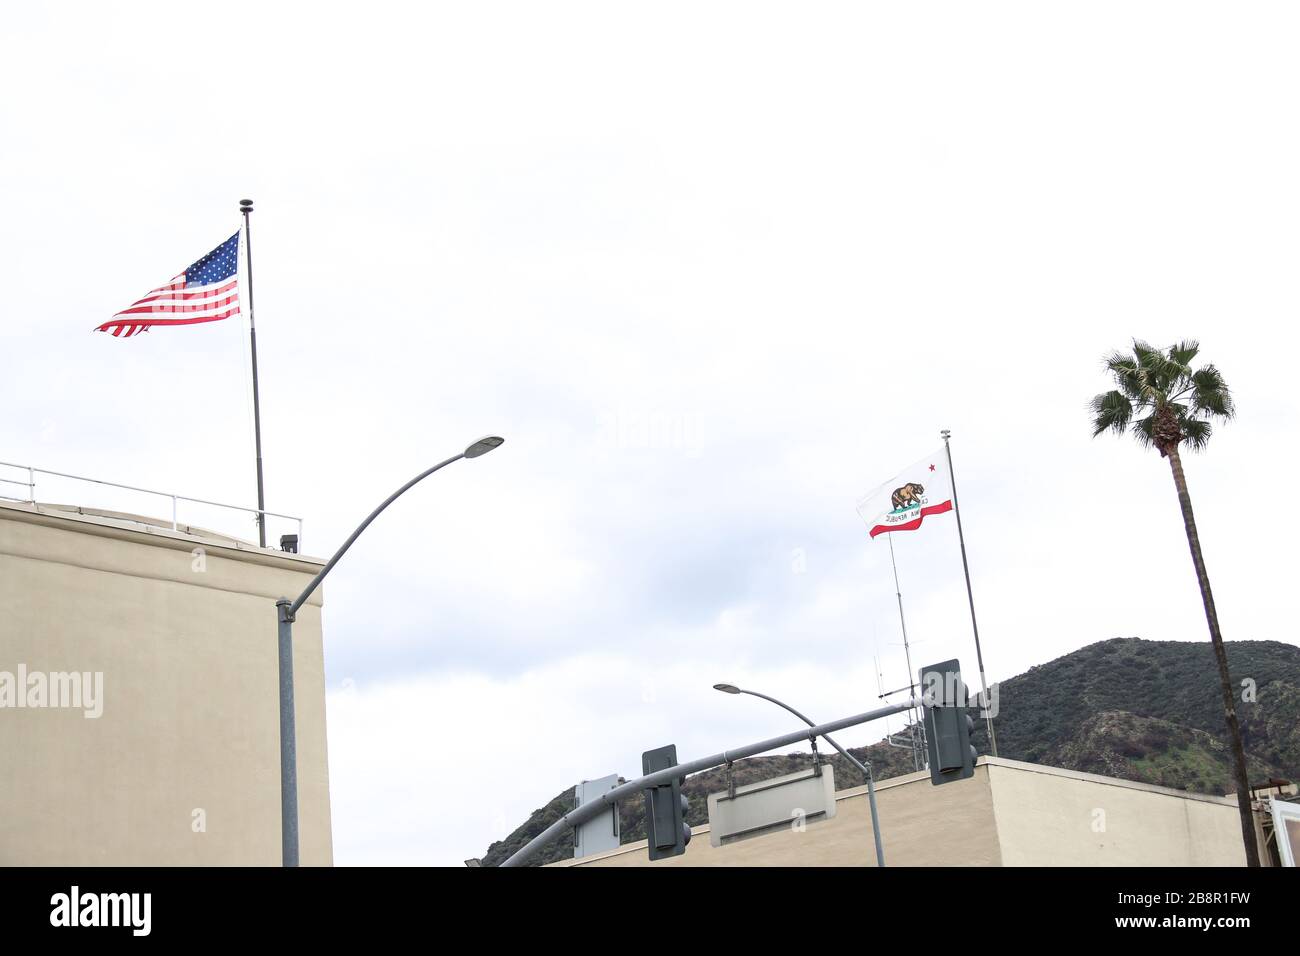 Burbank, California, USA. 22nd March, 2020. Flags of the United States and California Republic at Warner Bros. Studios in Burbank, temporarily closed in response to coronavirus COVID-19 pandemic, three days after the 'Safer at Home' order issued by both Los Angeles Mayor Eric Garcetti at the county level and California Governor Gavin Newsom at the state level on Thursday, March 19, 2020 which will stay in effect until at least April 19, 2020 amid the Coronavirus COVID-19 pandemic United States. Credit: Image Press Agency/Alamy Live News Stock Photo